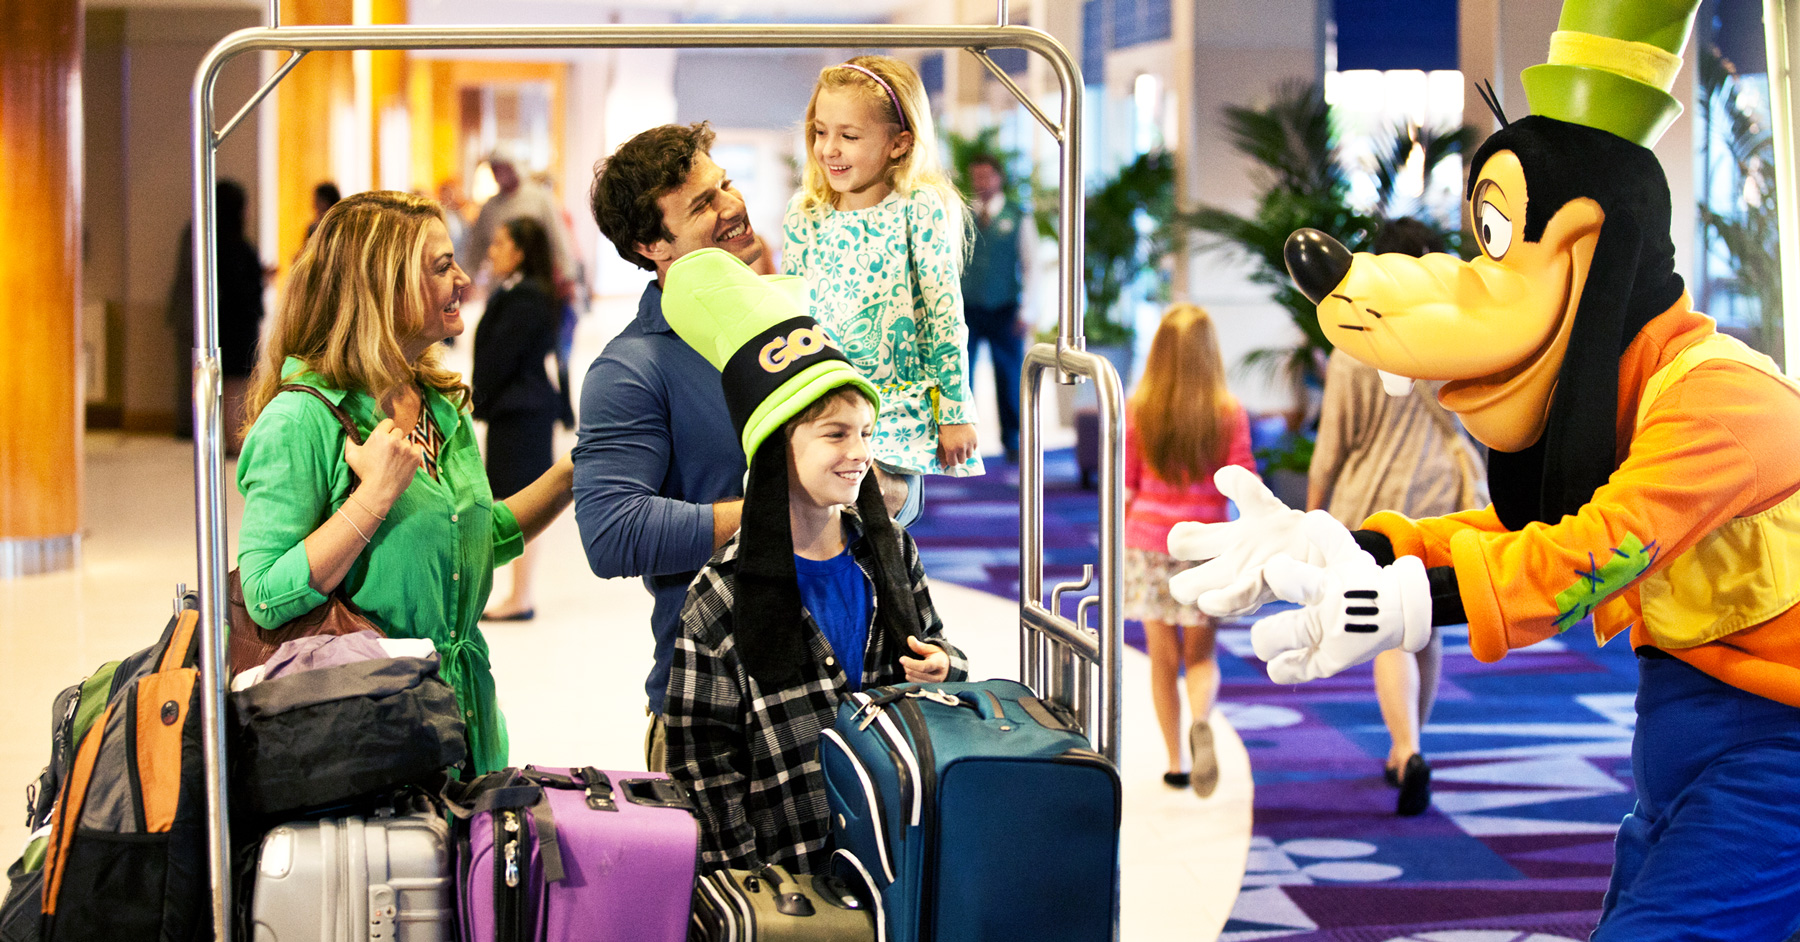 family of four with luggage on luggage cart checking into hotel and being greeted by Goofey